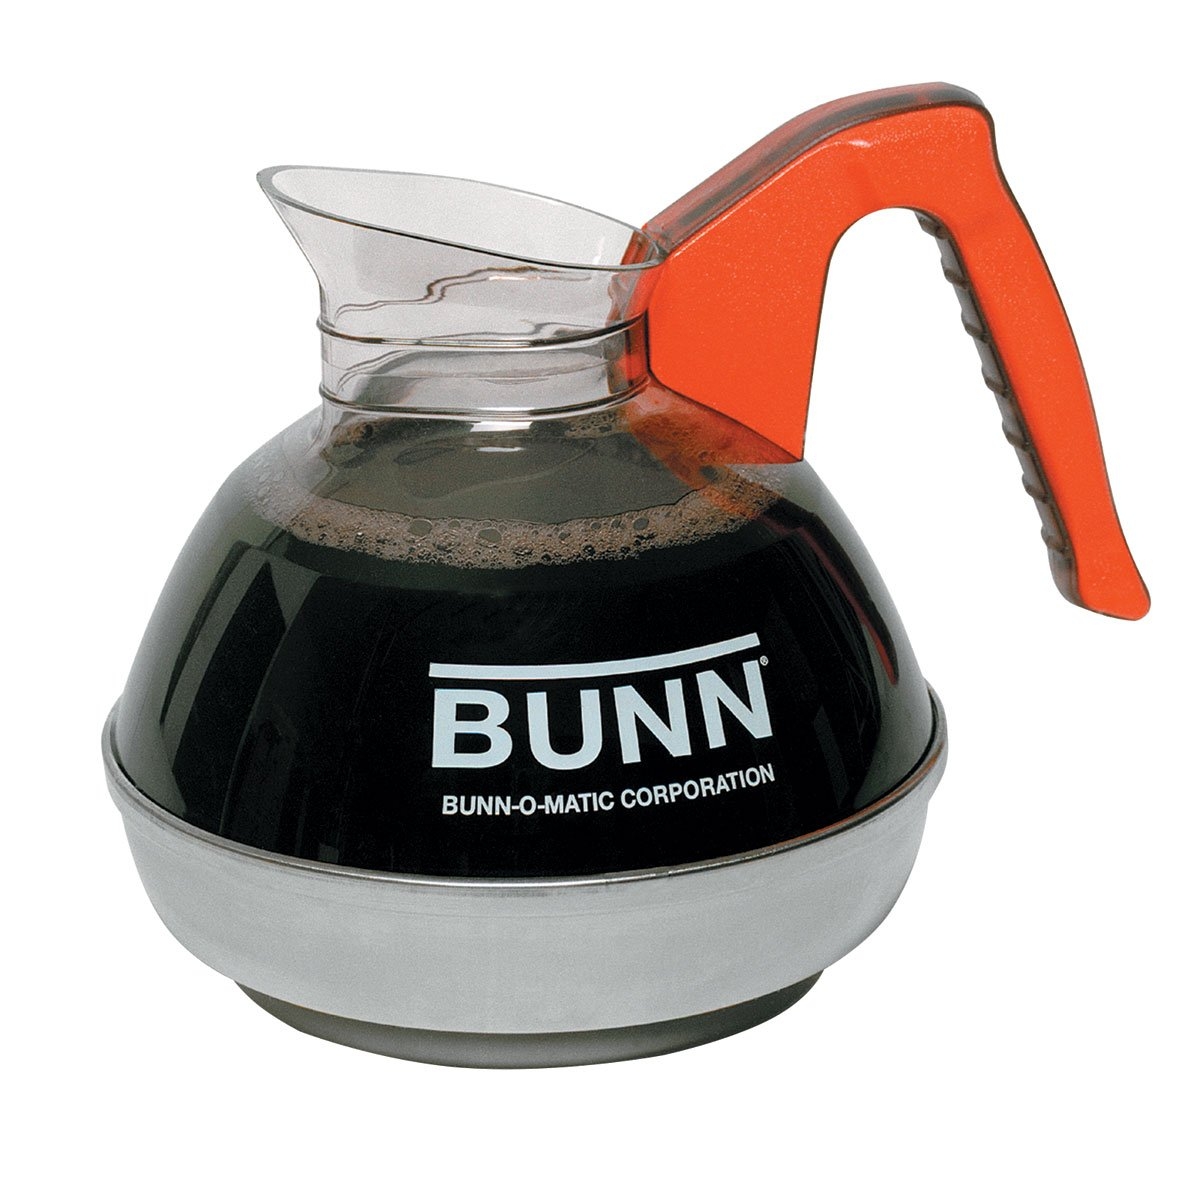 Bunn 06101.0101 64 oz. Easy Pour Coffee Decanter with Orange Handle and Stainless Steel Bottom Import To Shop ×Product